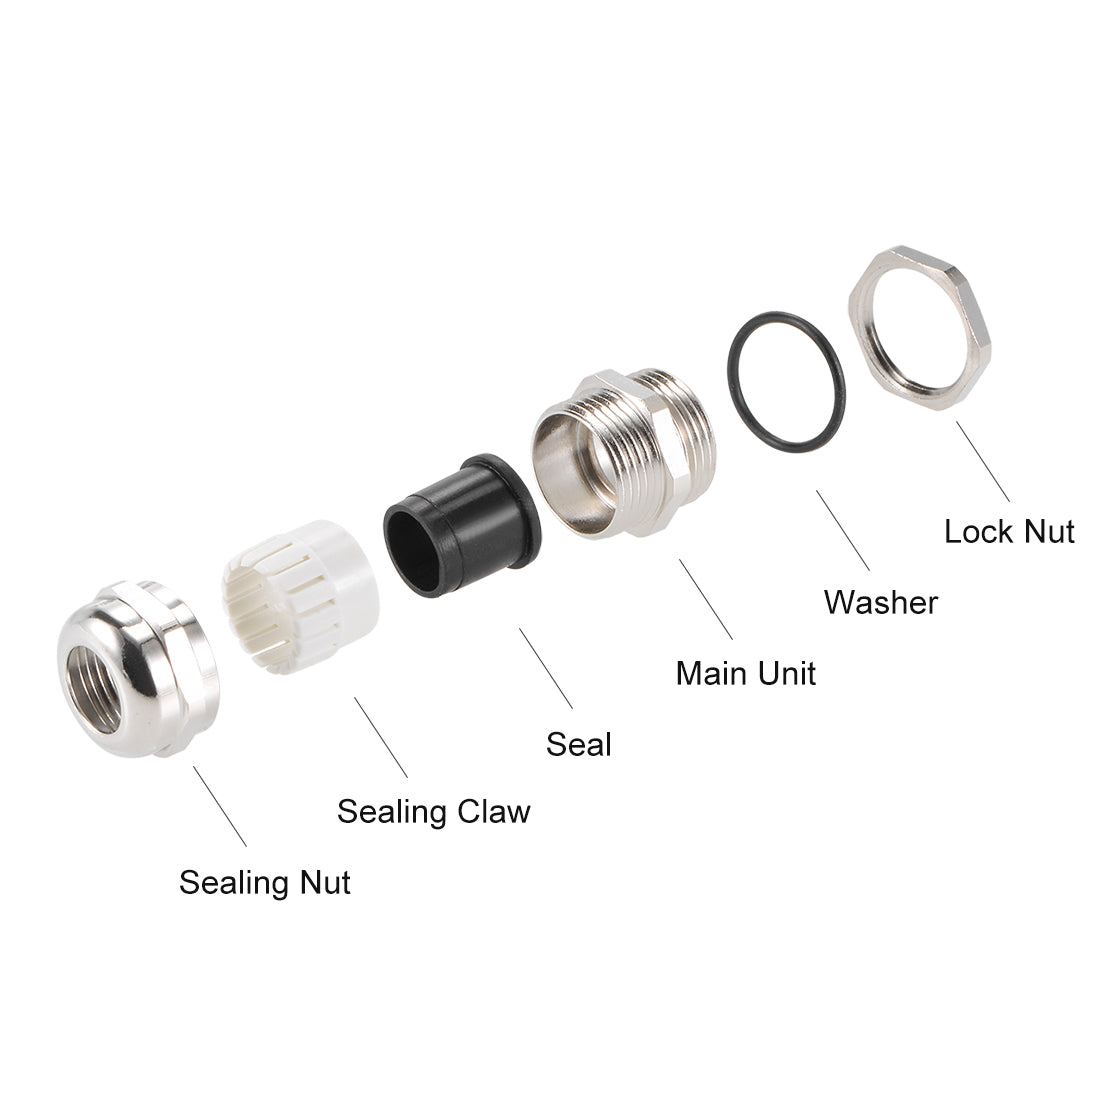 uxcell Uxcell PG13.5 Cable Gland 6mm-12mm Wire Hole Waterproof Metal Joint Adjustable Locknut with Washer 5pcs